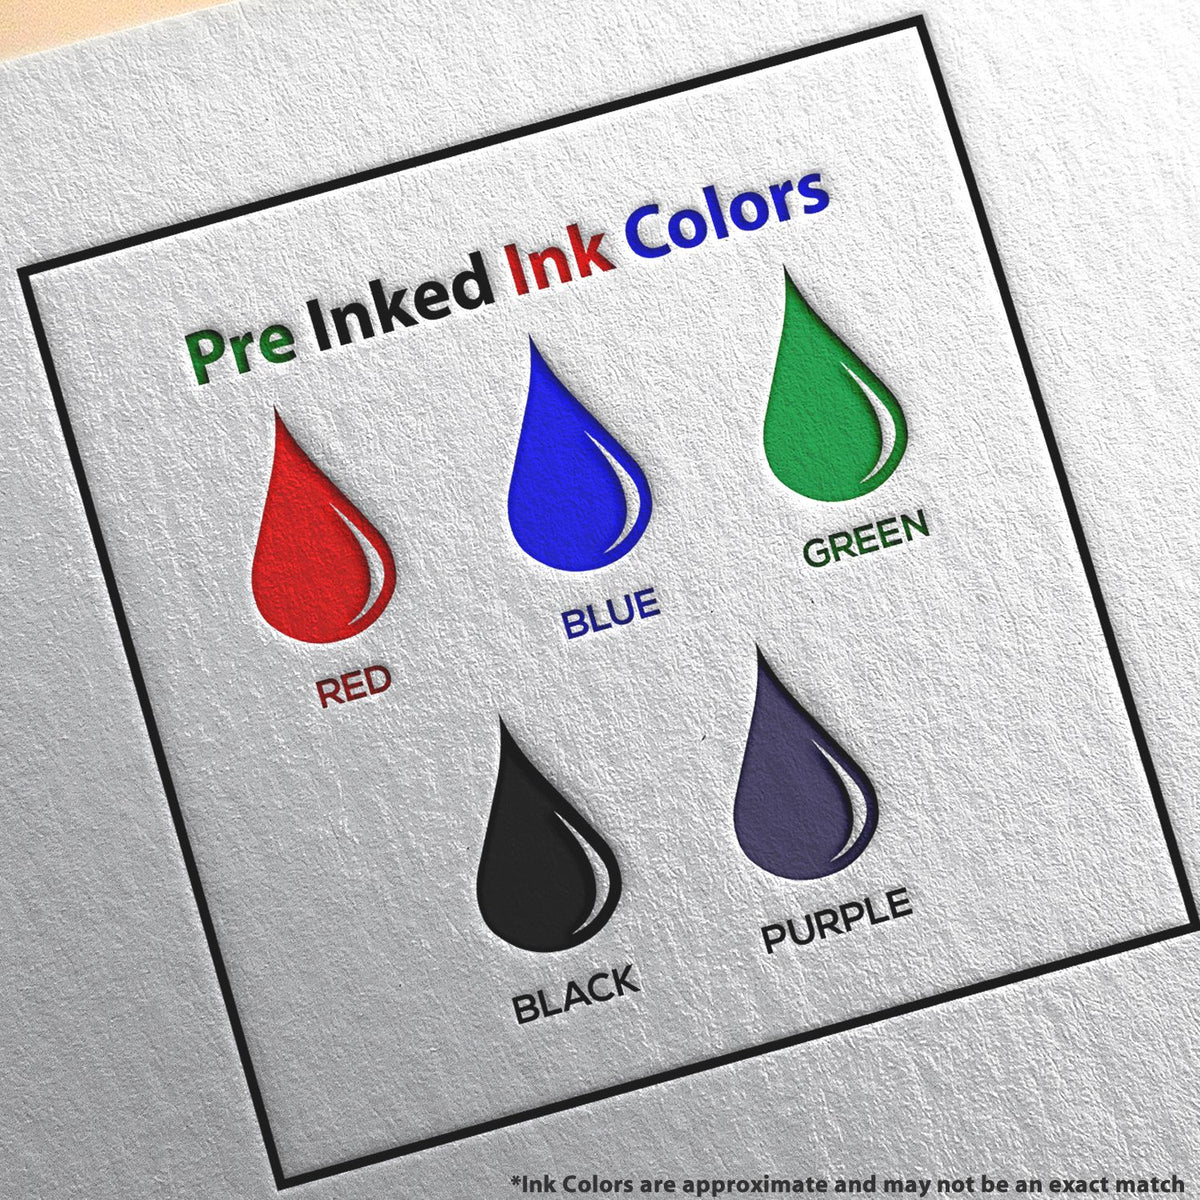 A picture showing the different ink colors or hues available for the Slim Pre-Inked Iowa Architect Seal Stamp product.